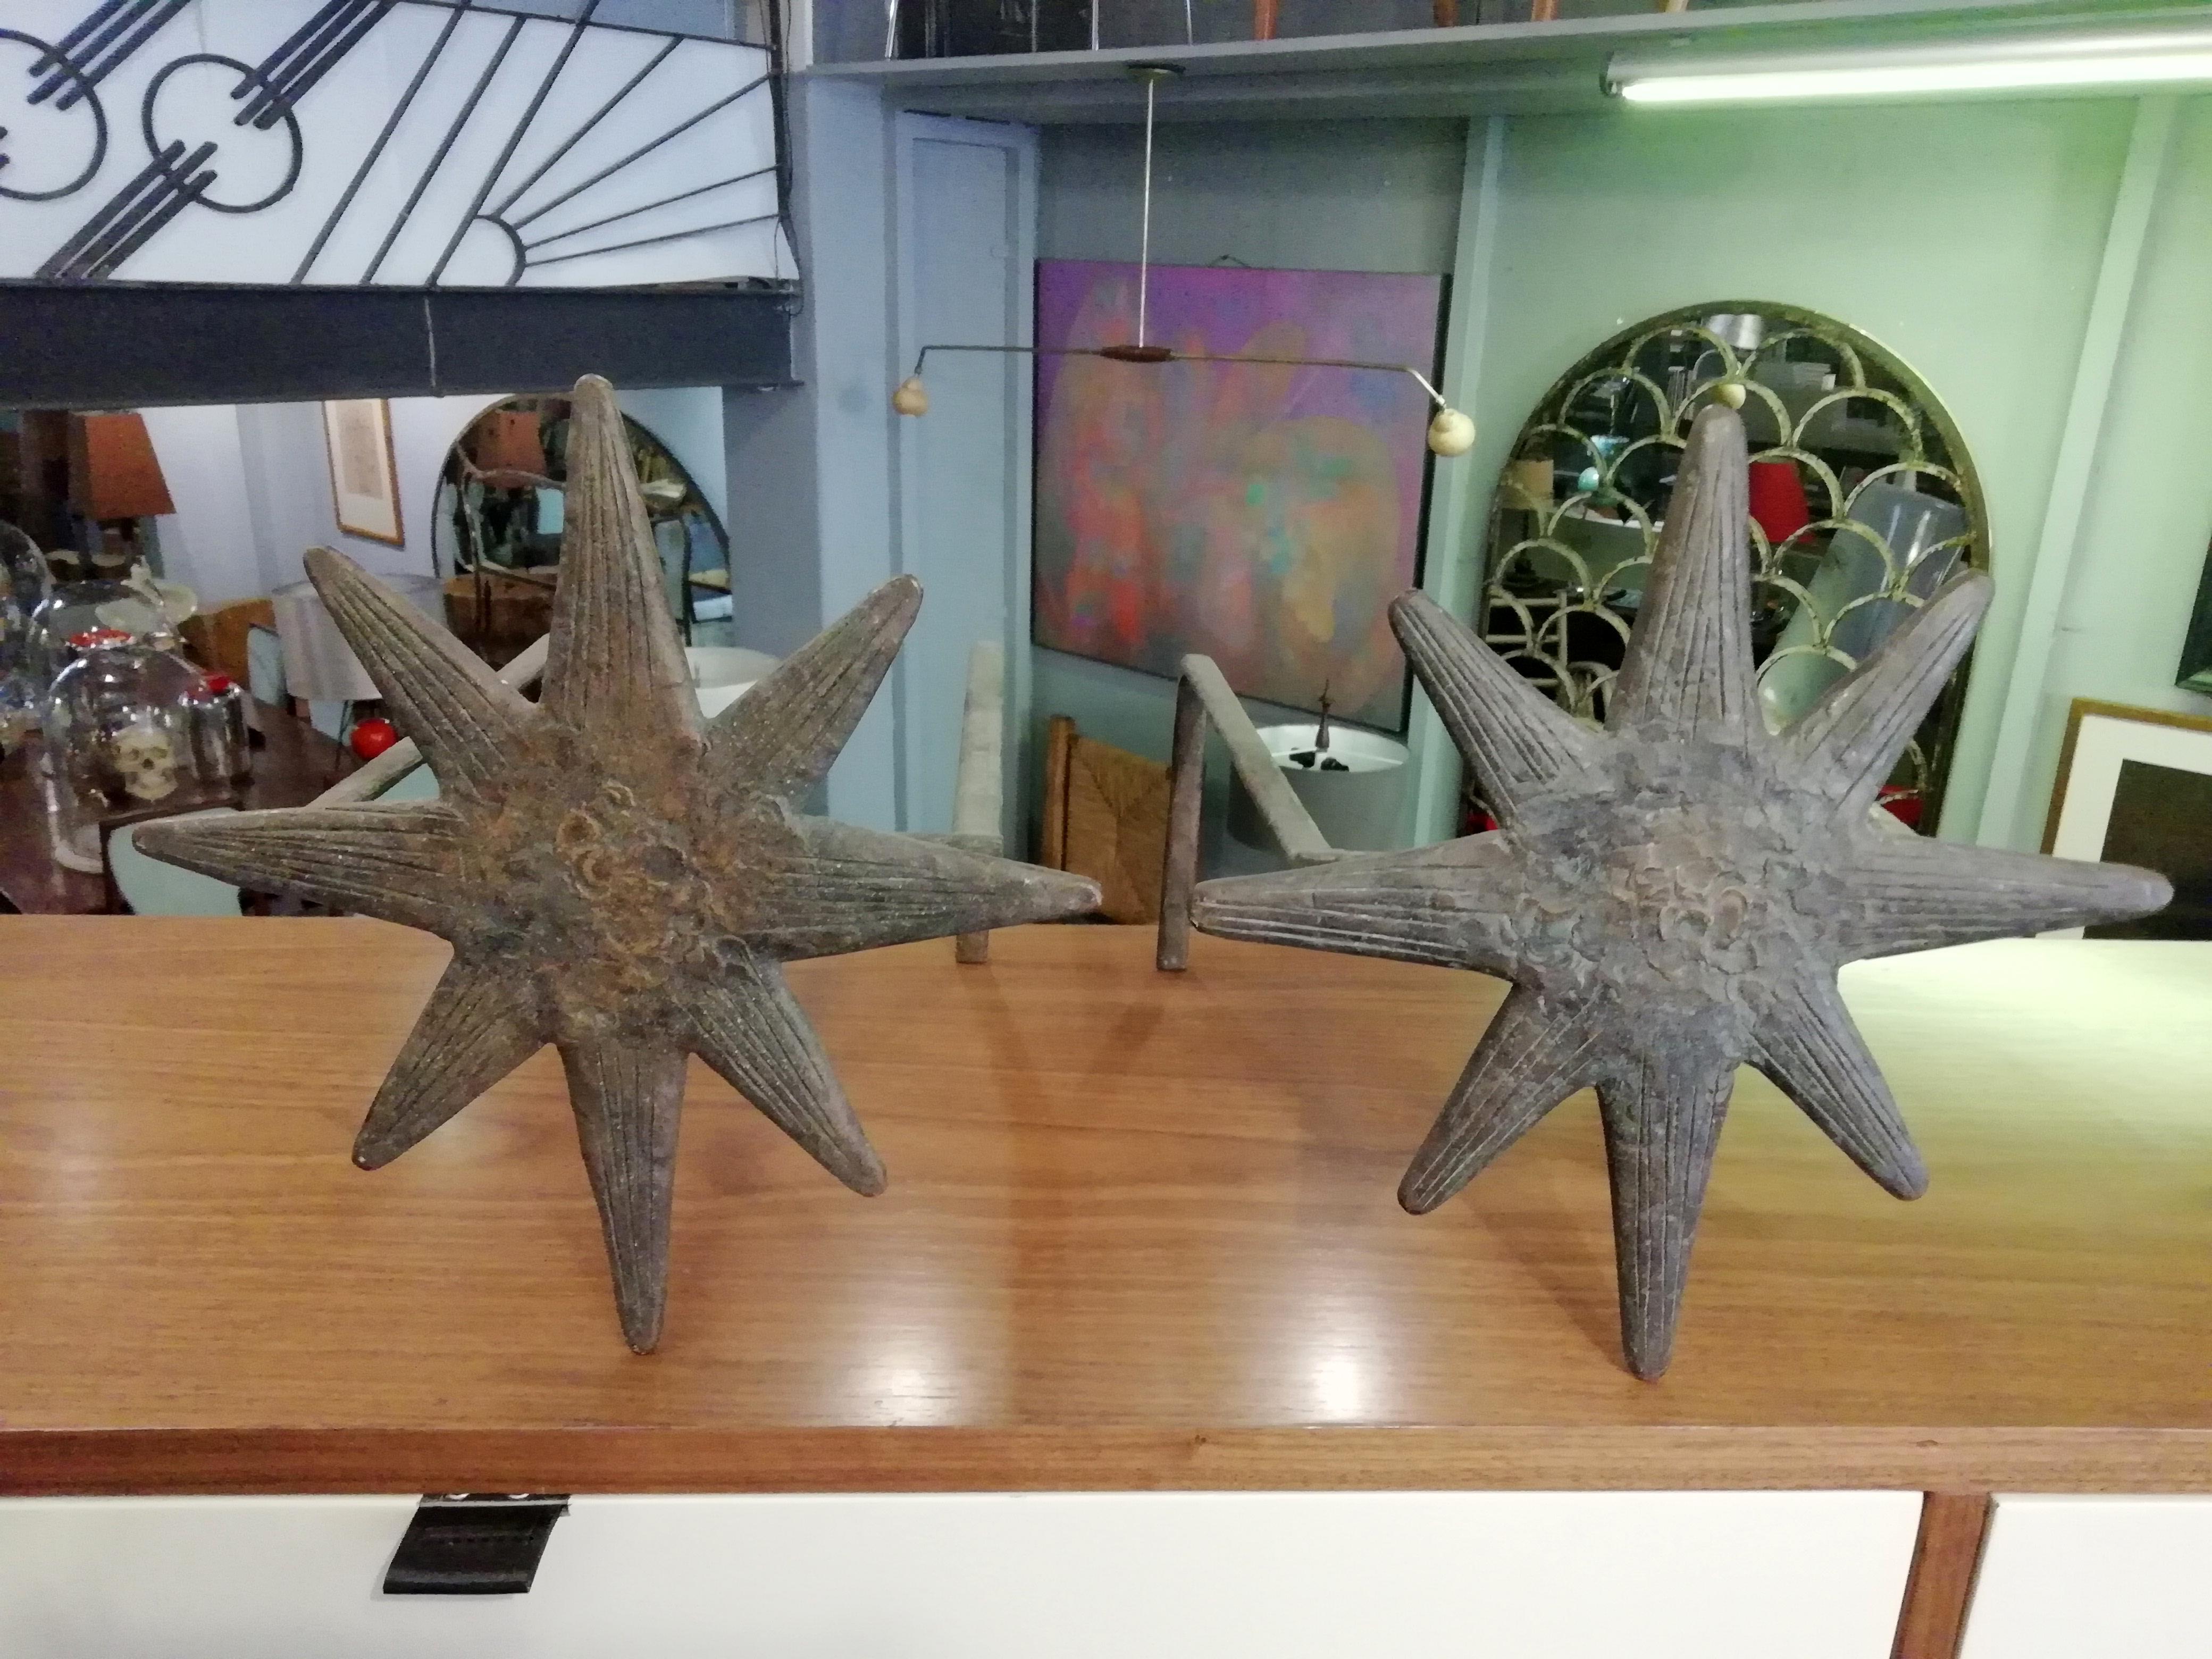 Exquisite pair of Mexican Mid-Century Modern patinated bronze andirons in the style of Diego Giacometti with 8-pointed star design.